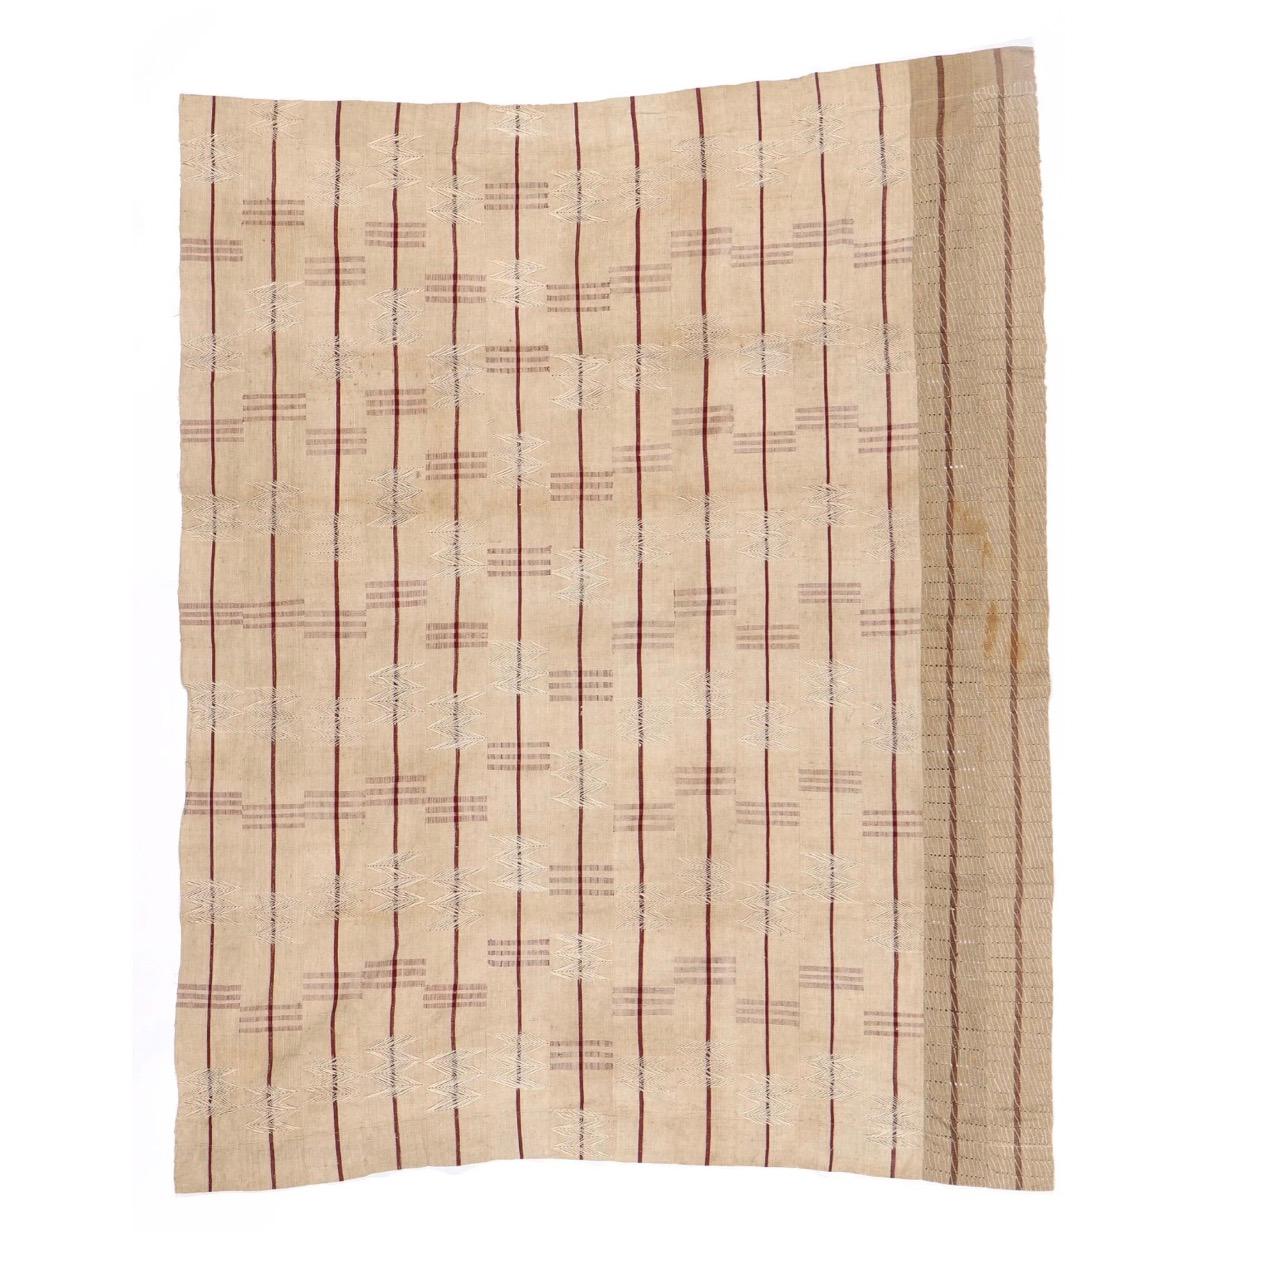 Gorgoues brown cotton strip weave wrapper cloth textile from the Yoruba people of Nigeria, Africa. 

Mid-20th century.

Size: 70'' x 57'' (178 x 145 cm)

This textile is handwoven from heavy weight cotton from the Yoruba of Nigeria. The